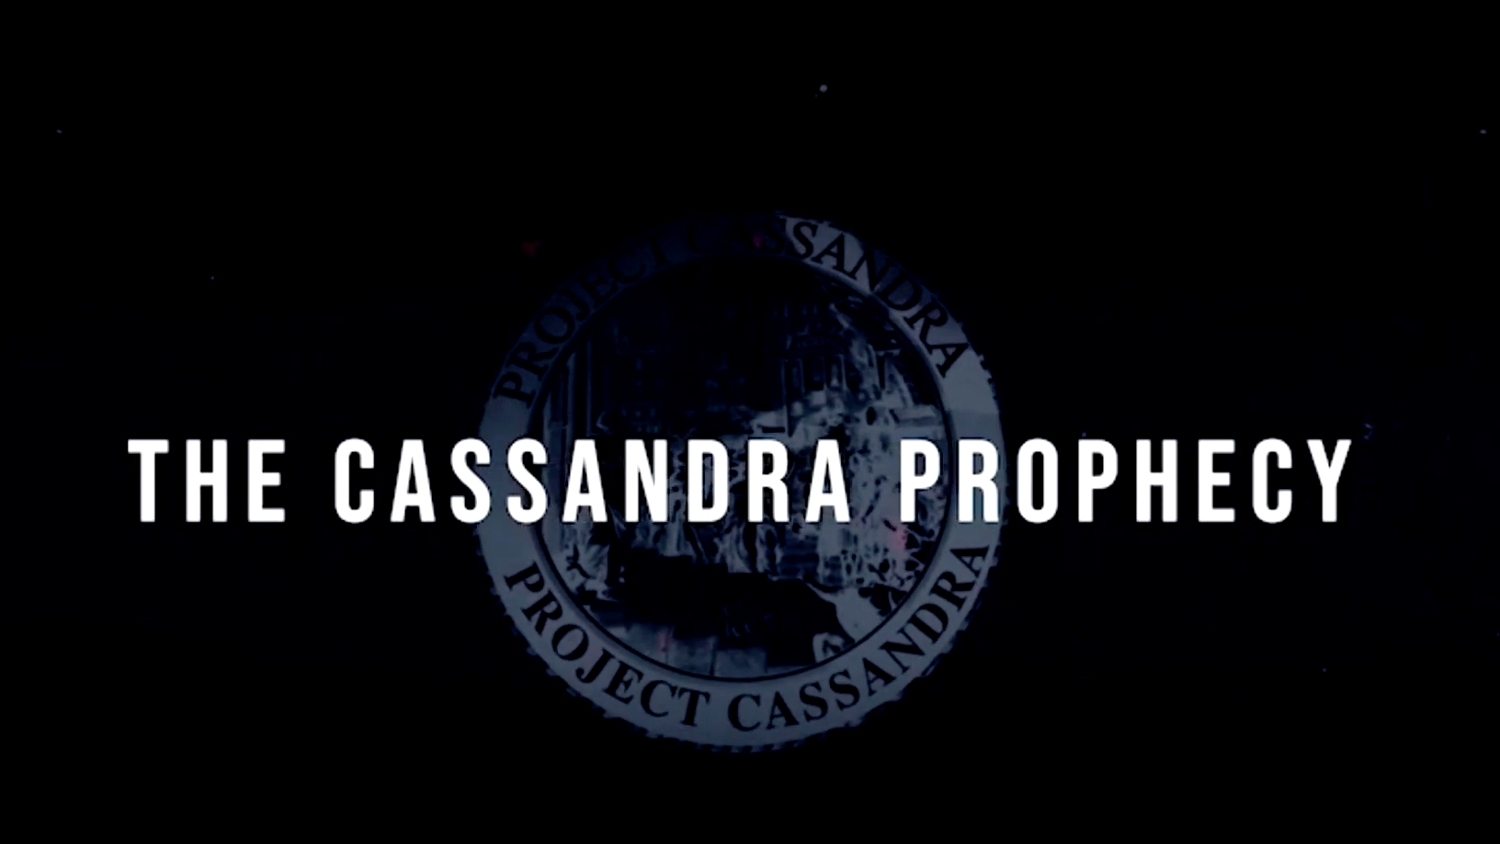 “The Cassandra Prophecy” documentary series follows US and Mossad operations against Hezbollah.